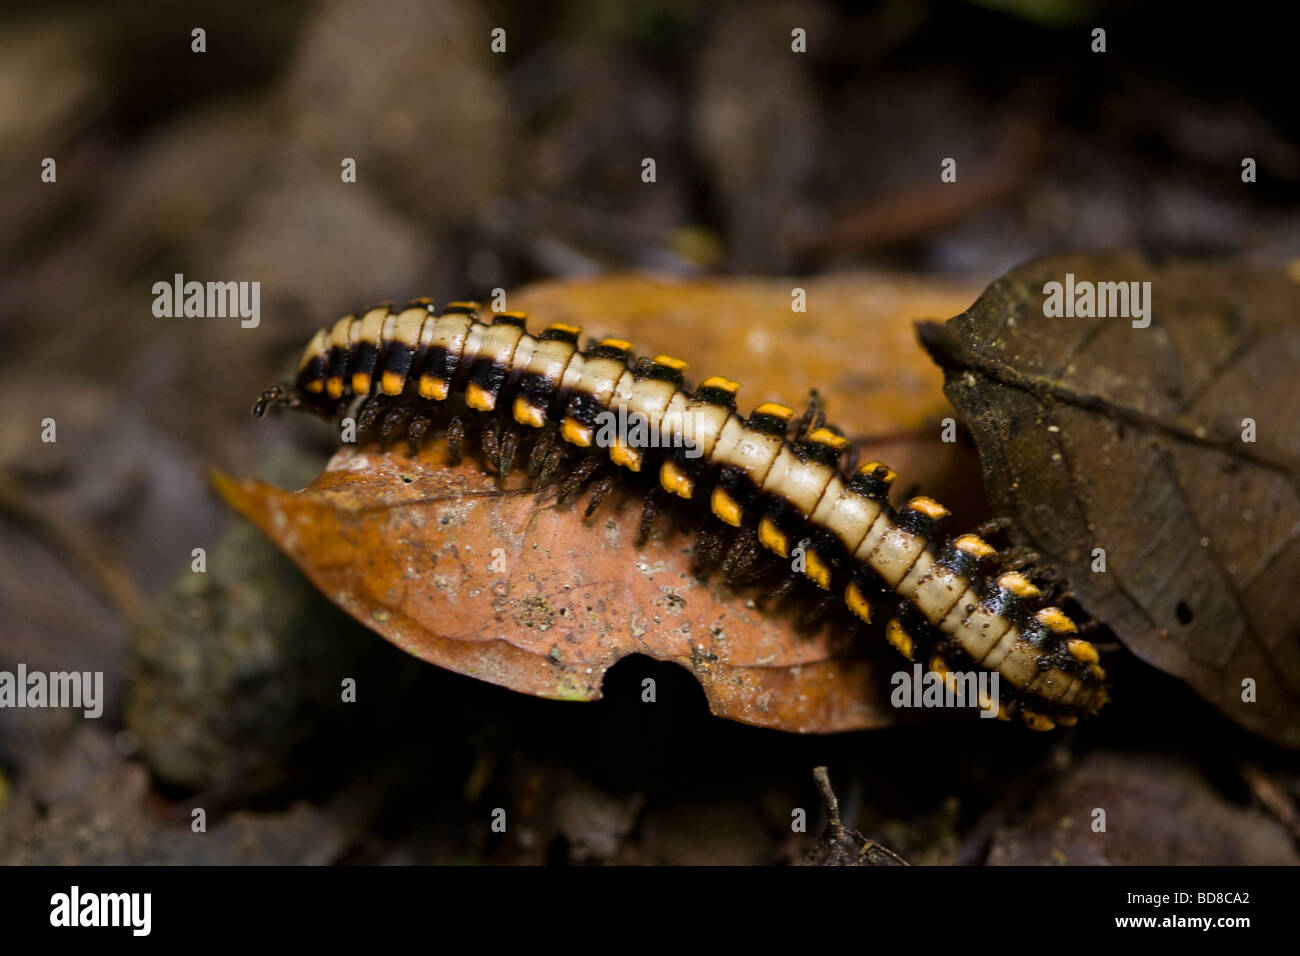 Polydesmid or flat-backed millipede on the forest floor in the Monteverde Cloud Forest Reserve in Puntarenas, Costa Rica. Stock Photo